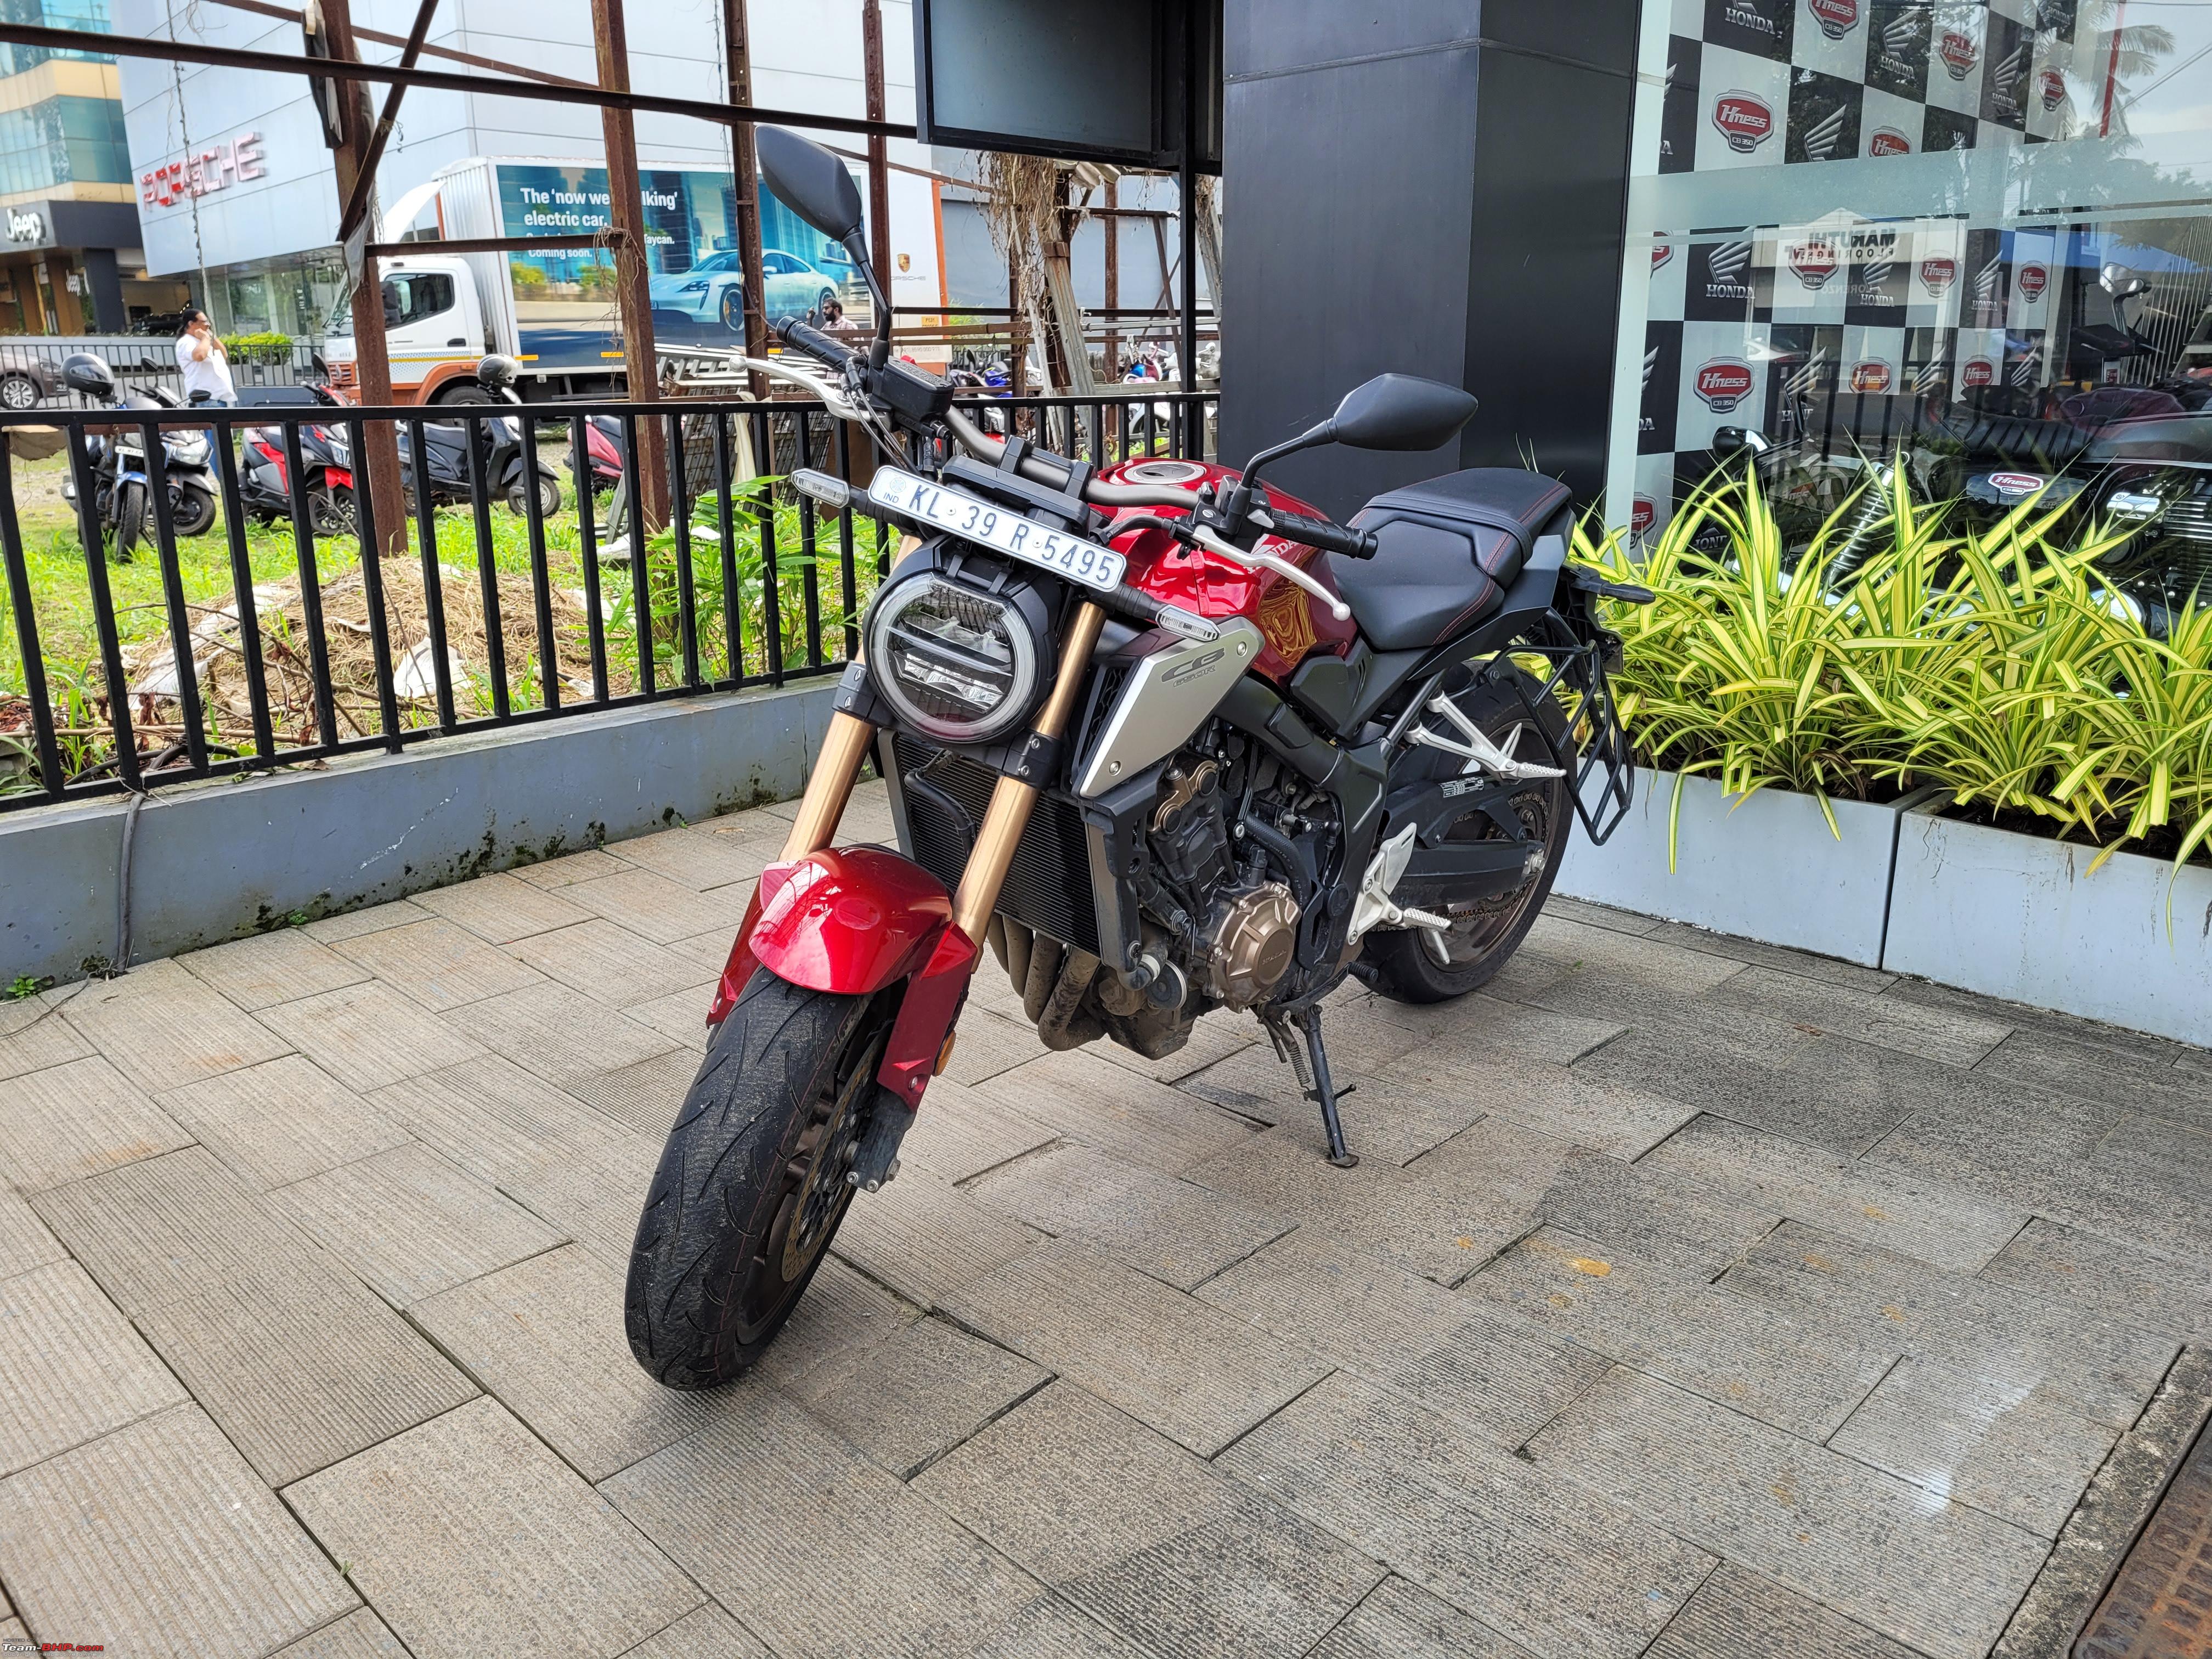 EXCLUSIVE: 2021 Honda CB650R India Review – An Underrated Pricey